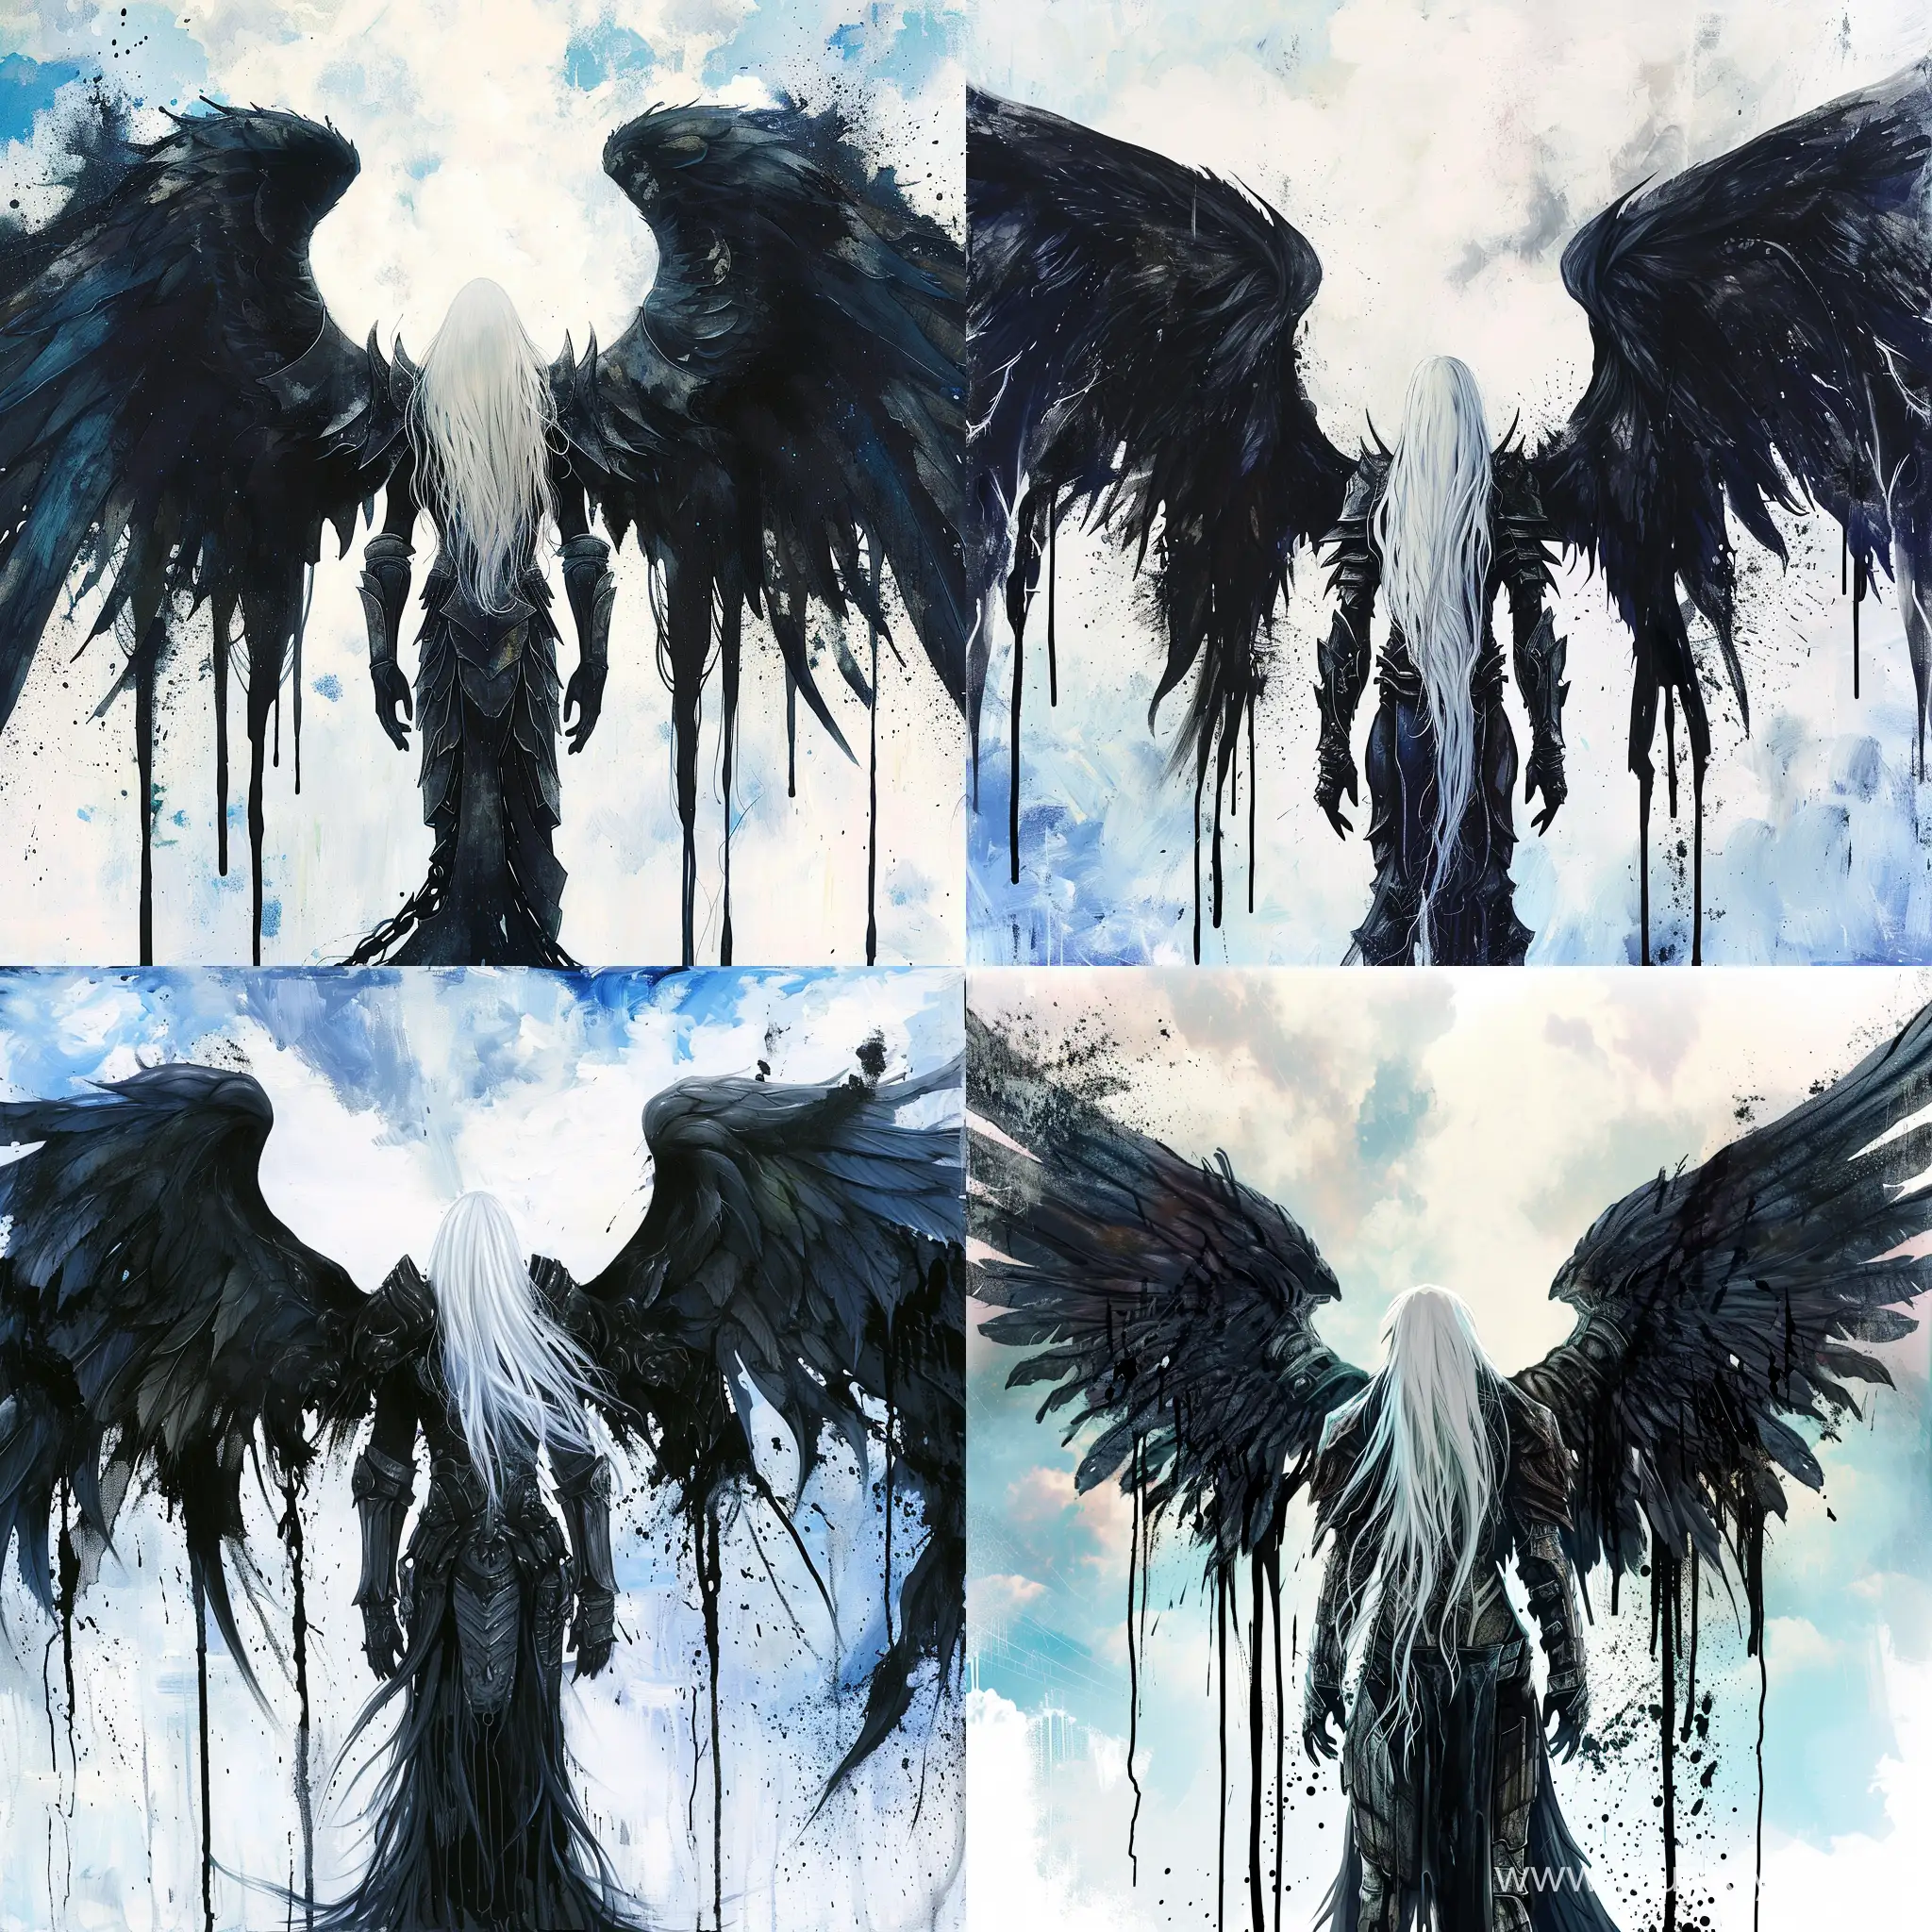 features a dark angel with large black wings, standing in front of a sky background with white and blue hues, the angel has long white hair and is wearing a armor-like outfit, the wings are spread out and there are black paint drips trailing from them